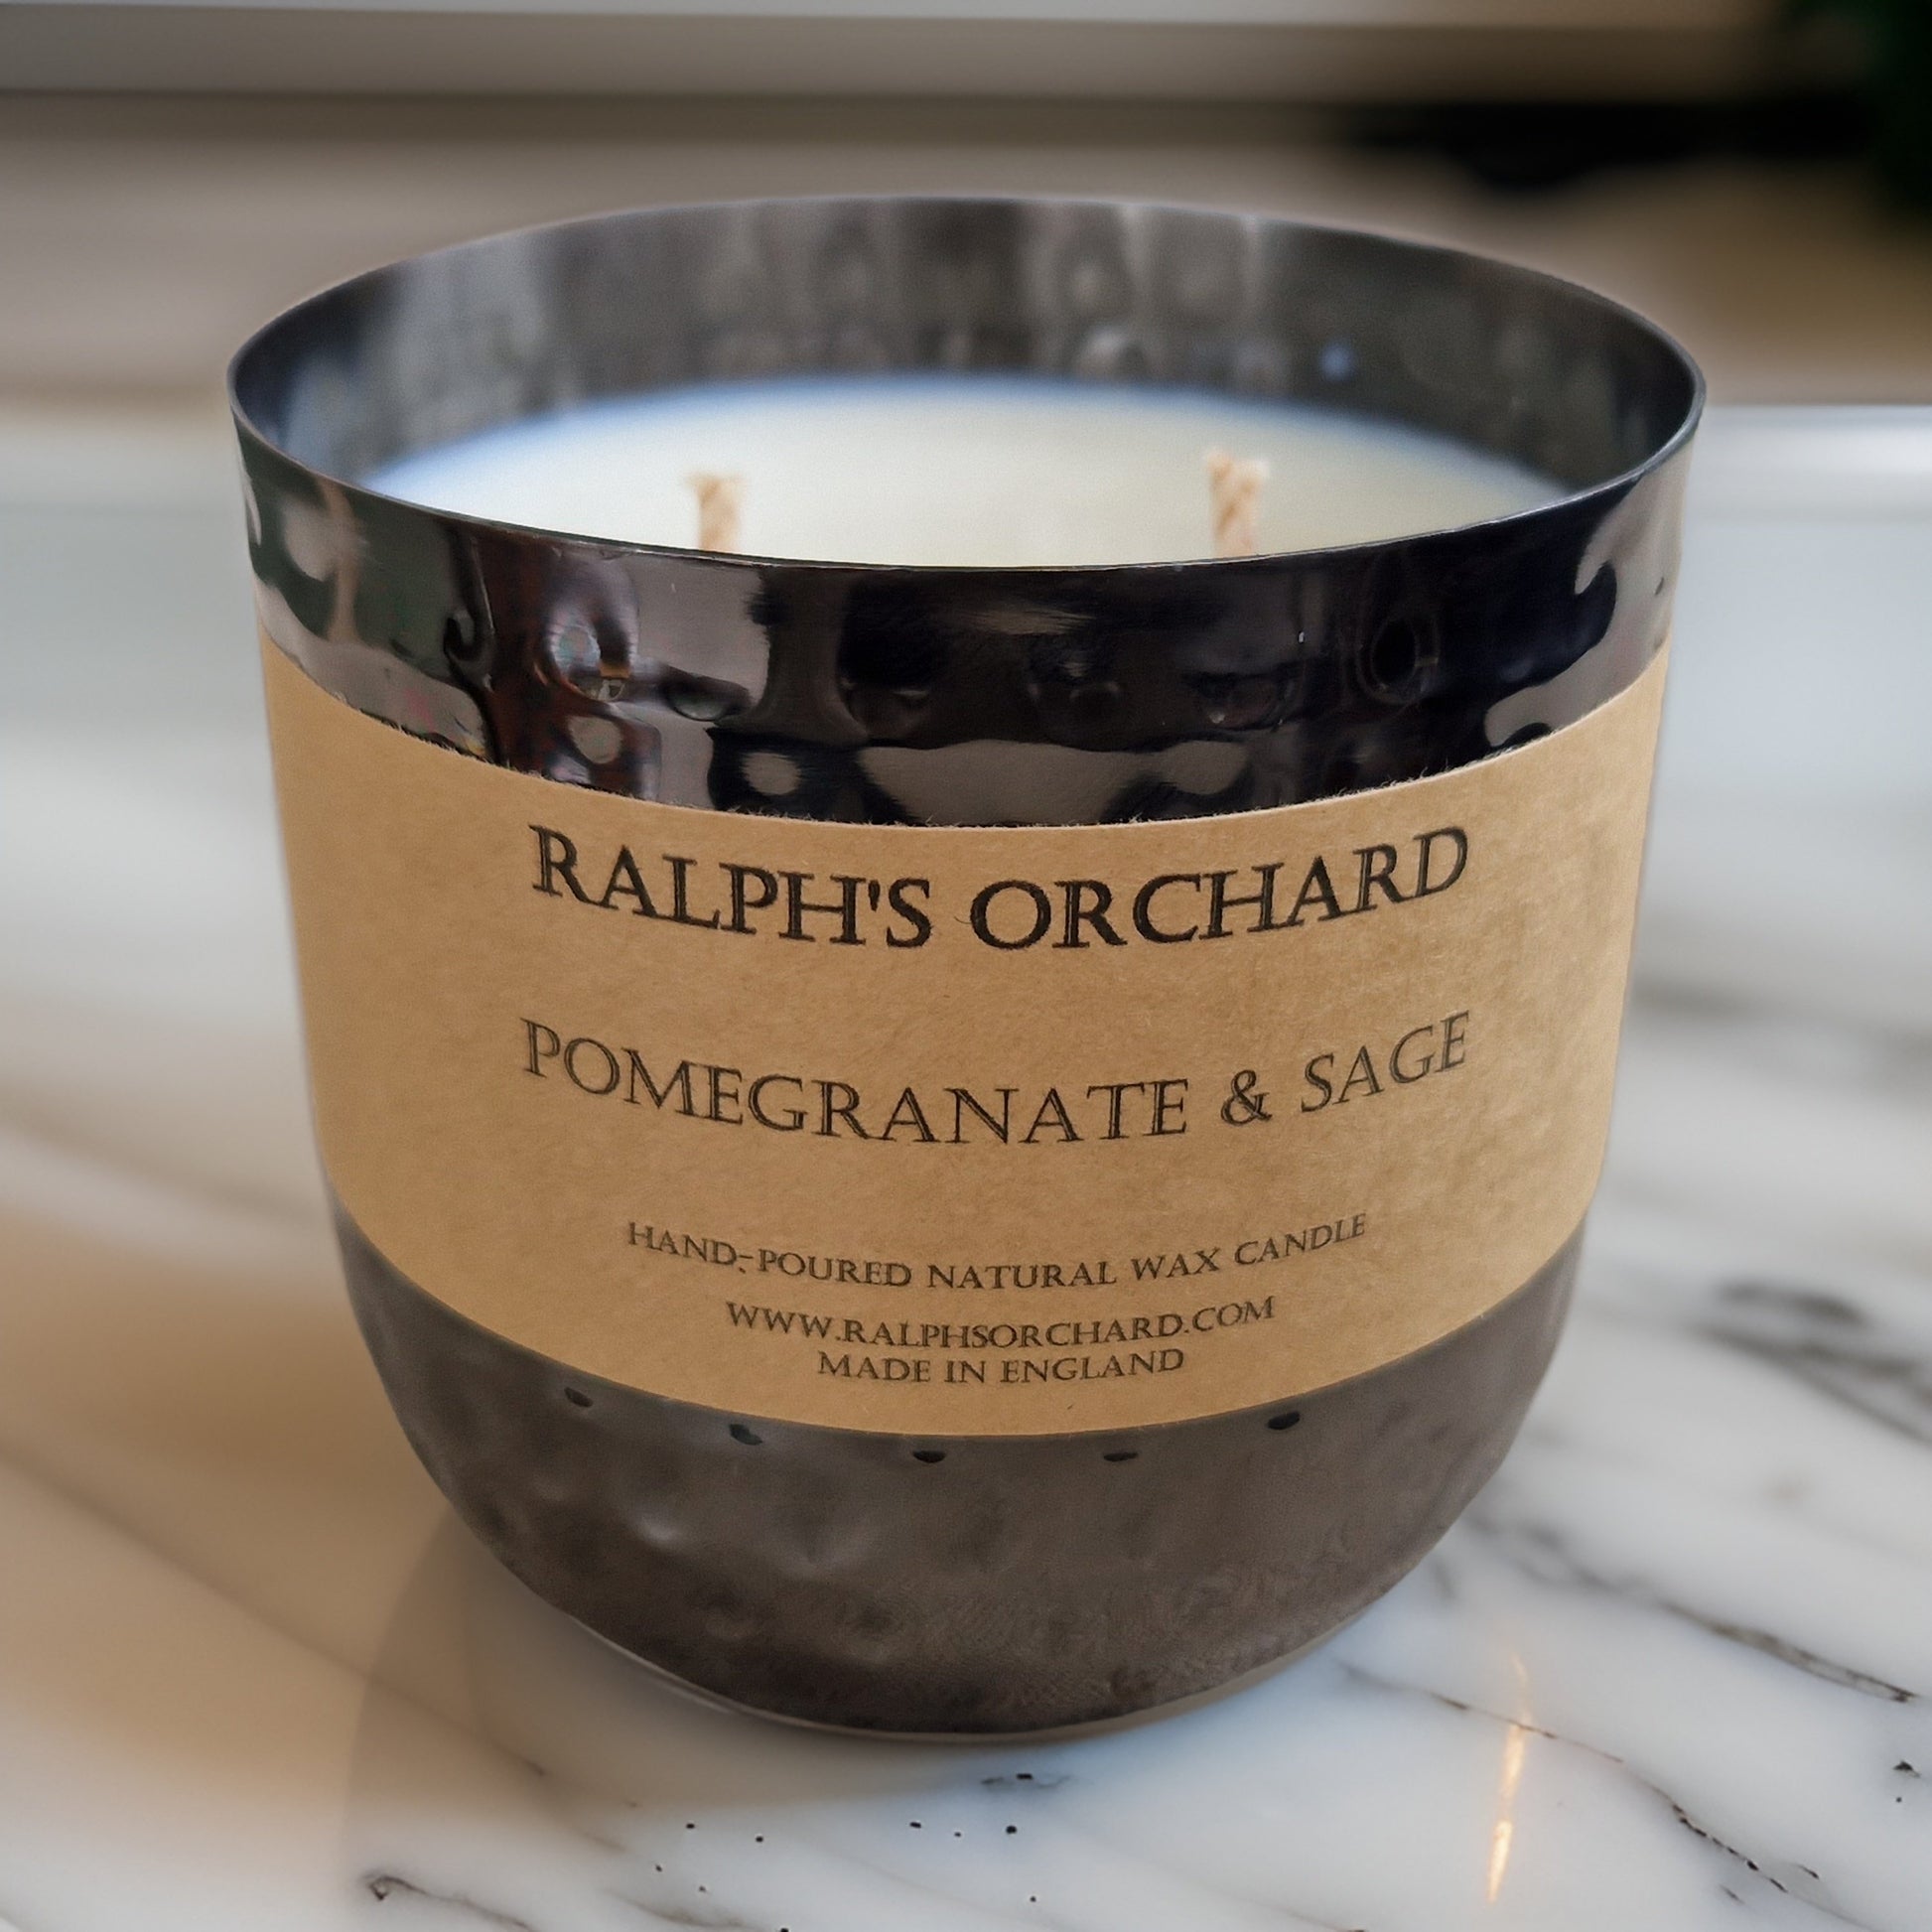 Pomegranate & Sage scented soy candle in 2 wick black tin